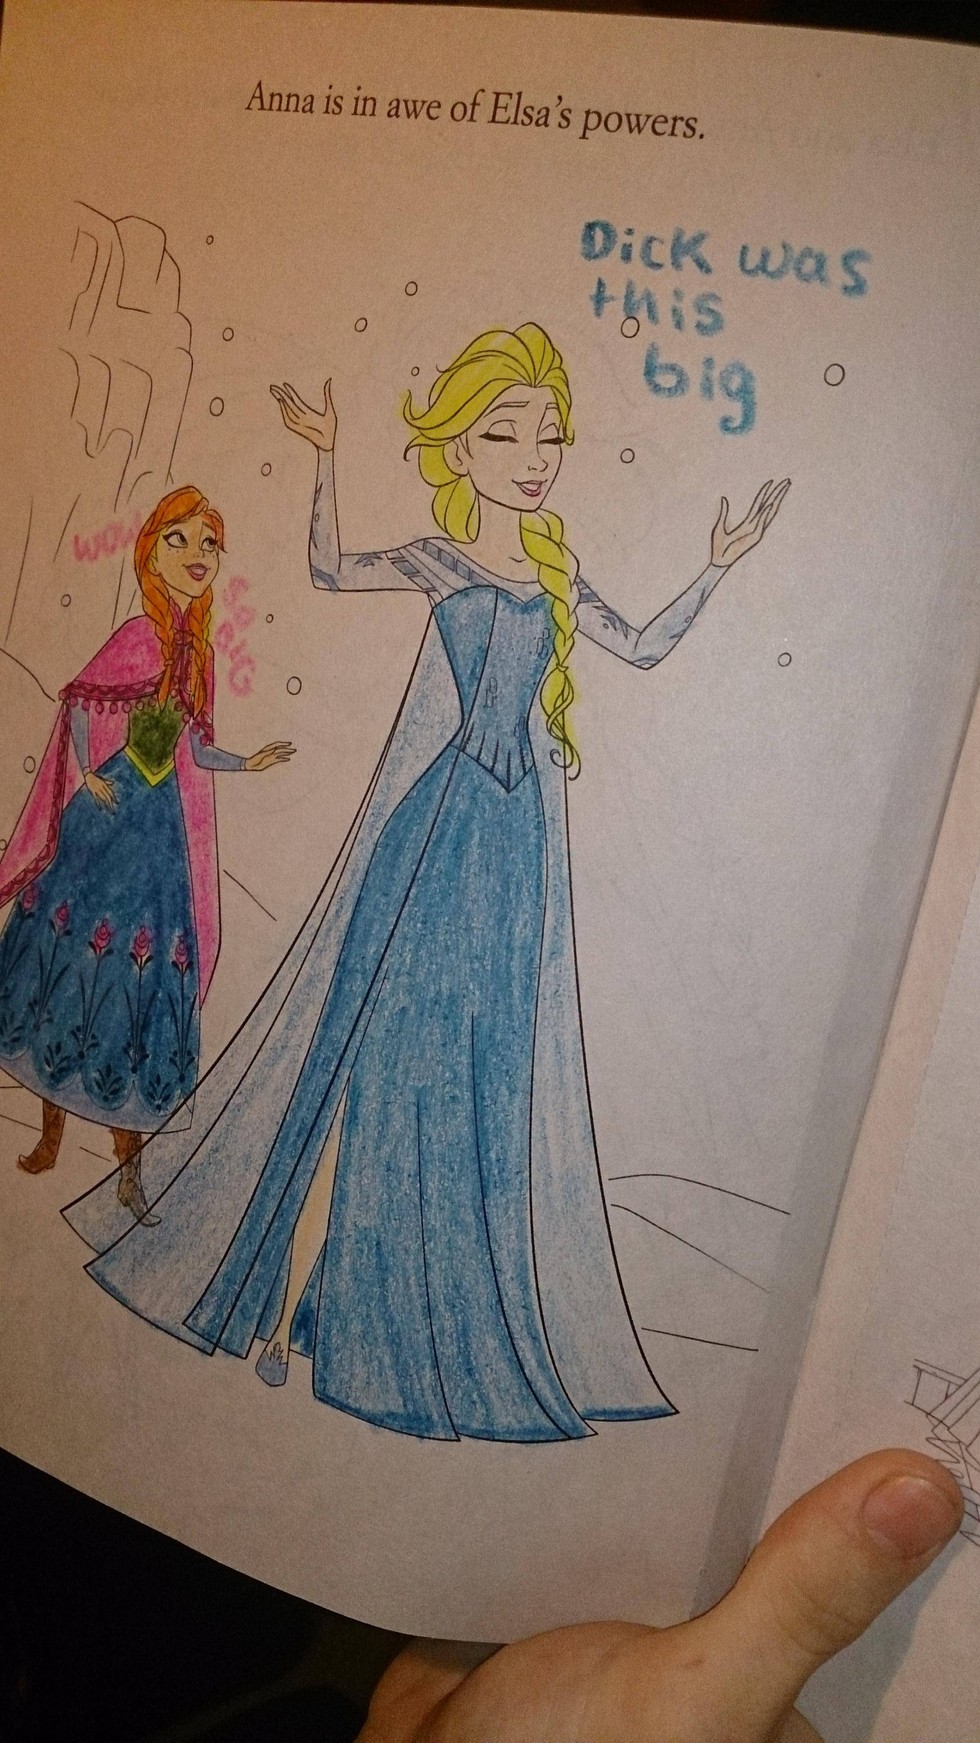 coloring books corrupted center ruin childhood elsa anna found care powers awe wtf january